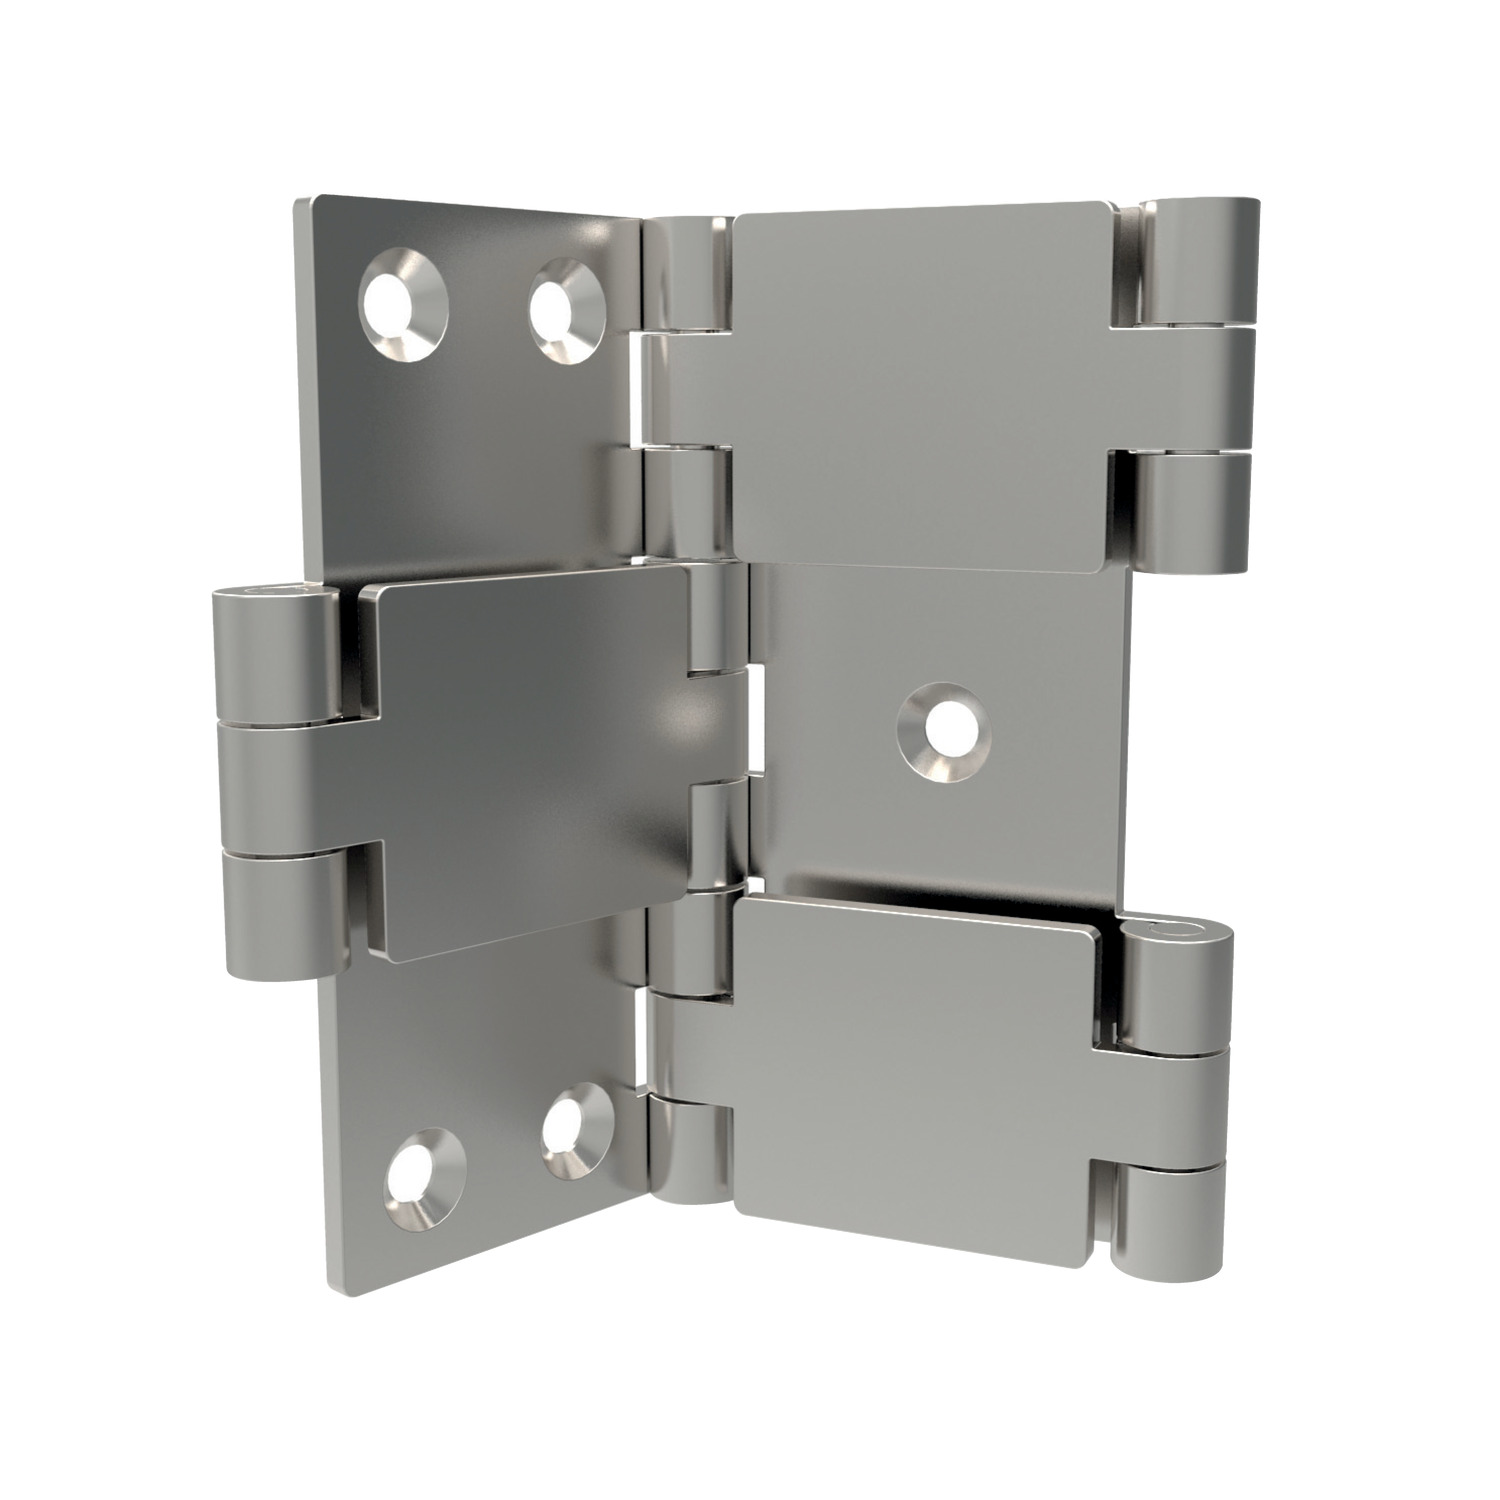 S2010.AC0060 Surface Mount Hinges - Double Pivot Stainless steel. 64 x 60